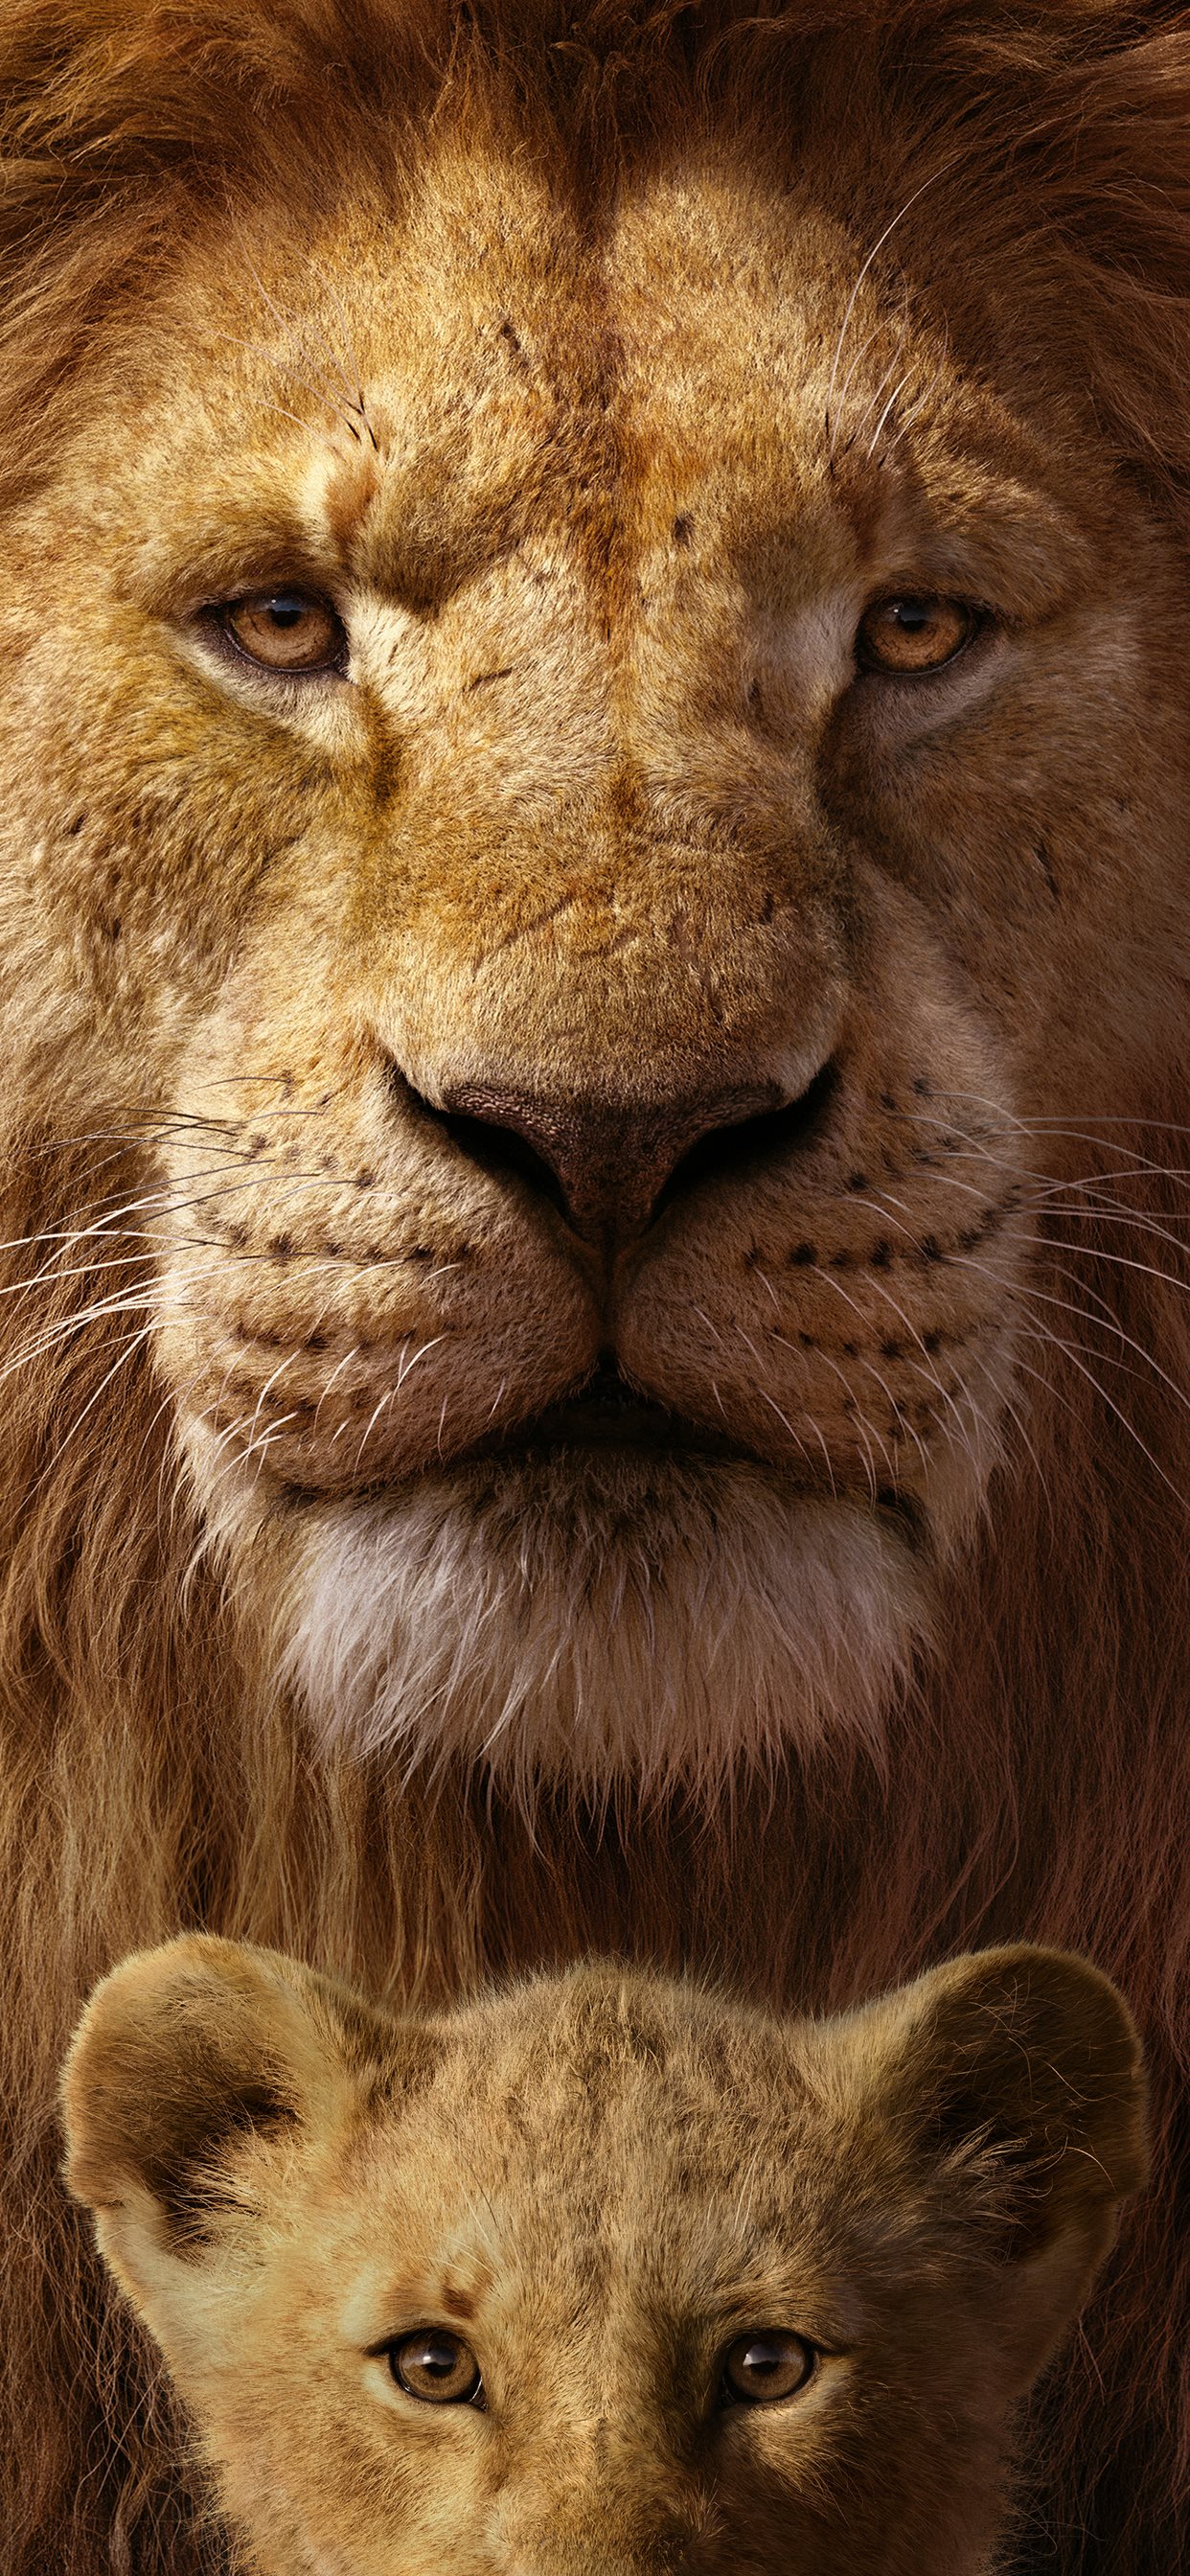 the lion king 8k iPhone Wallpaper Free Download